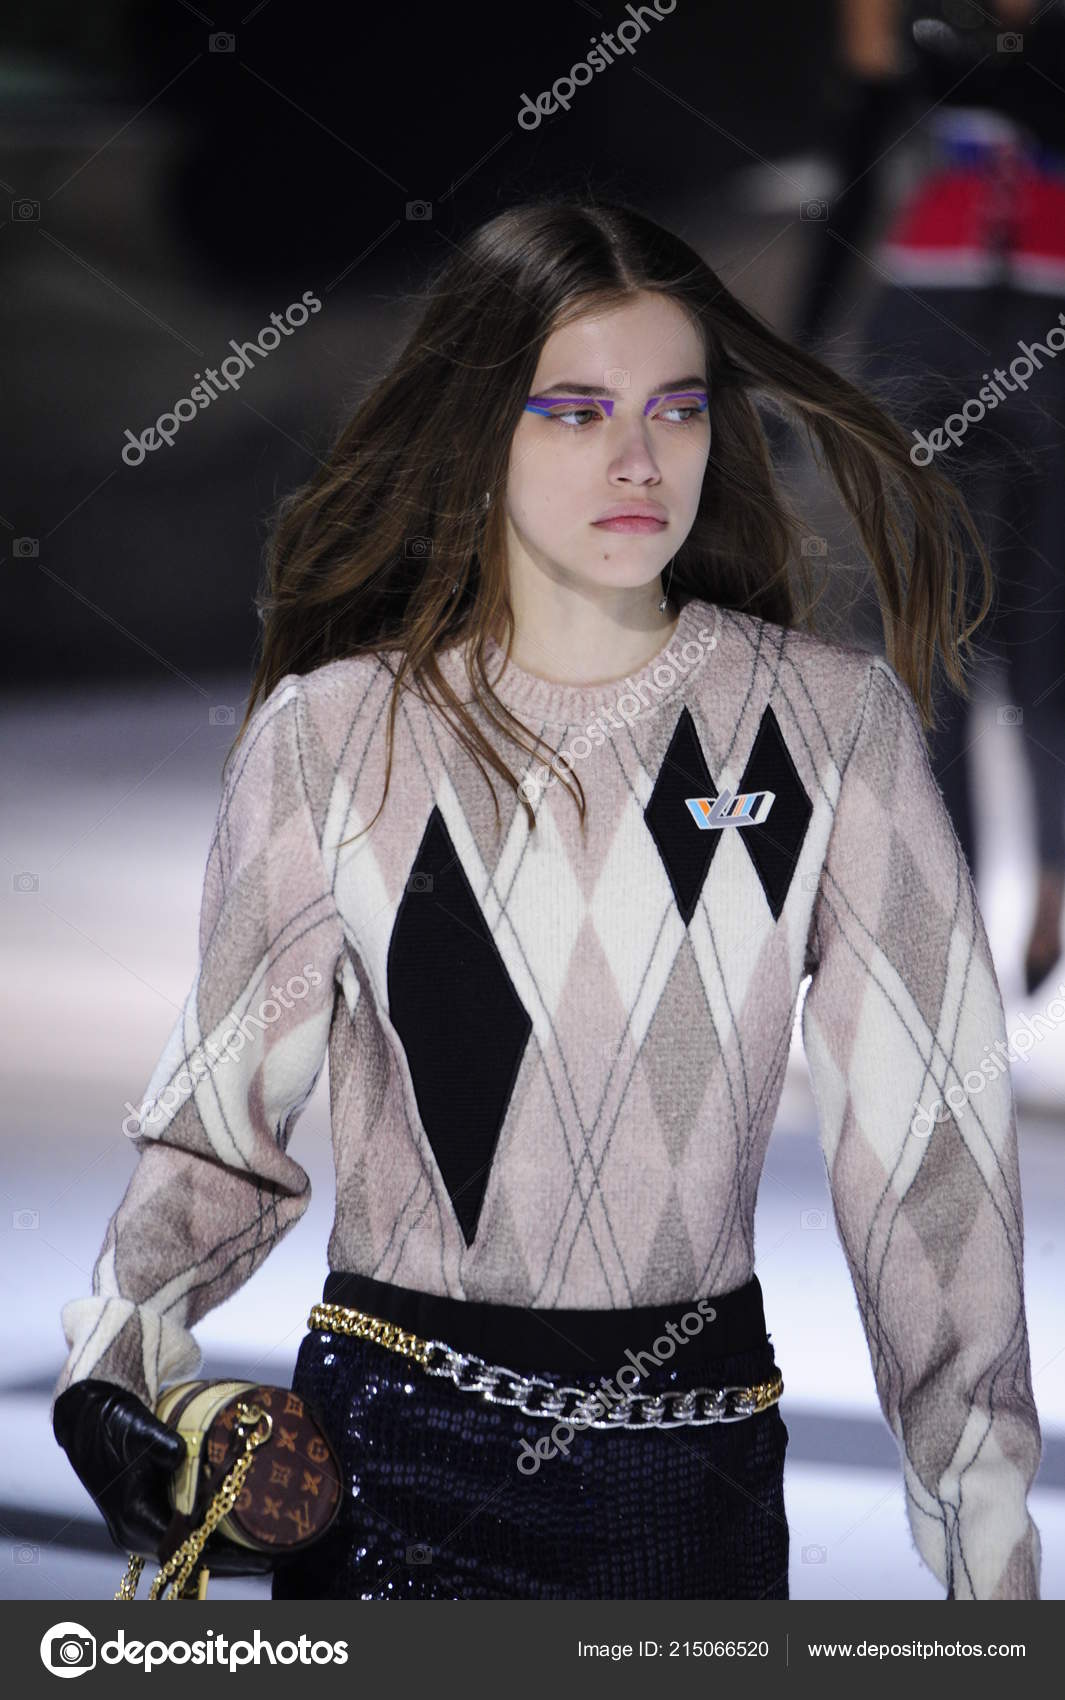 Model walks on the runway during the Louis Vuitton fashion show